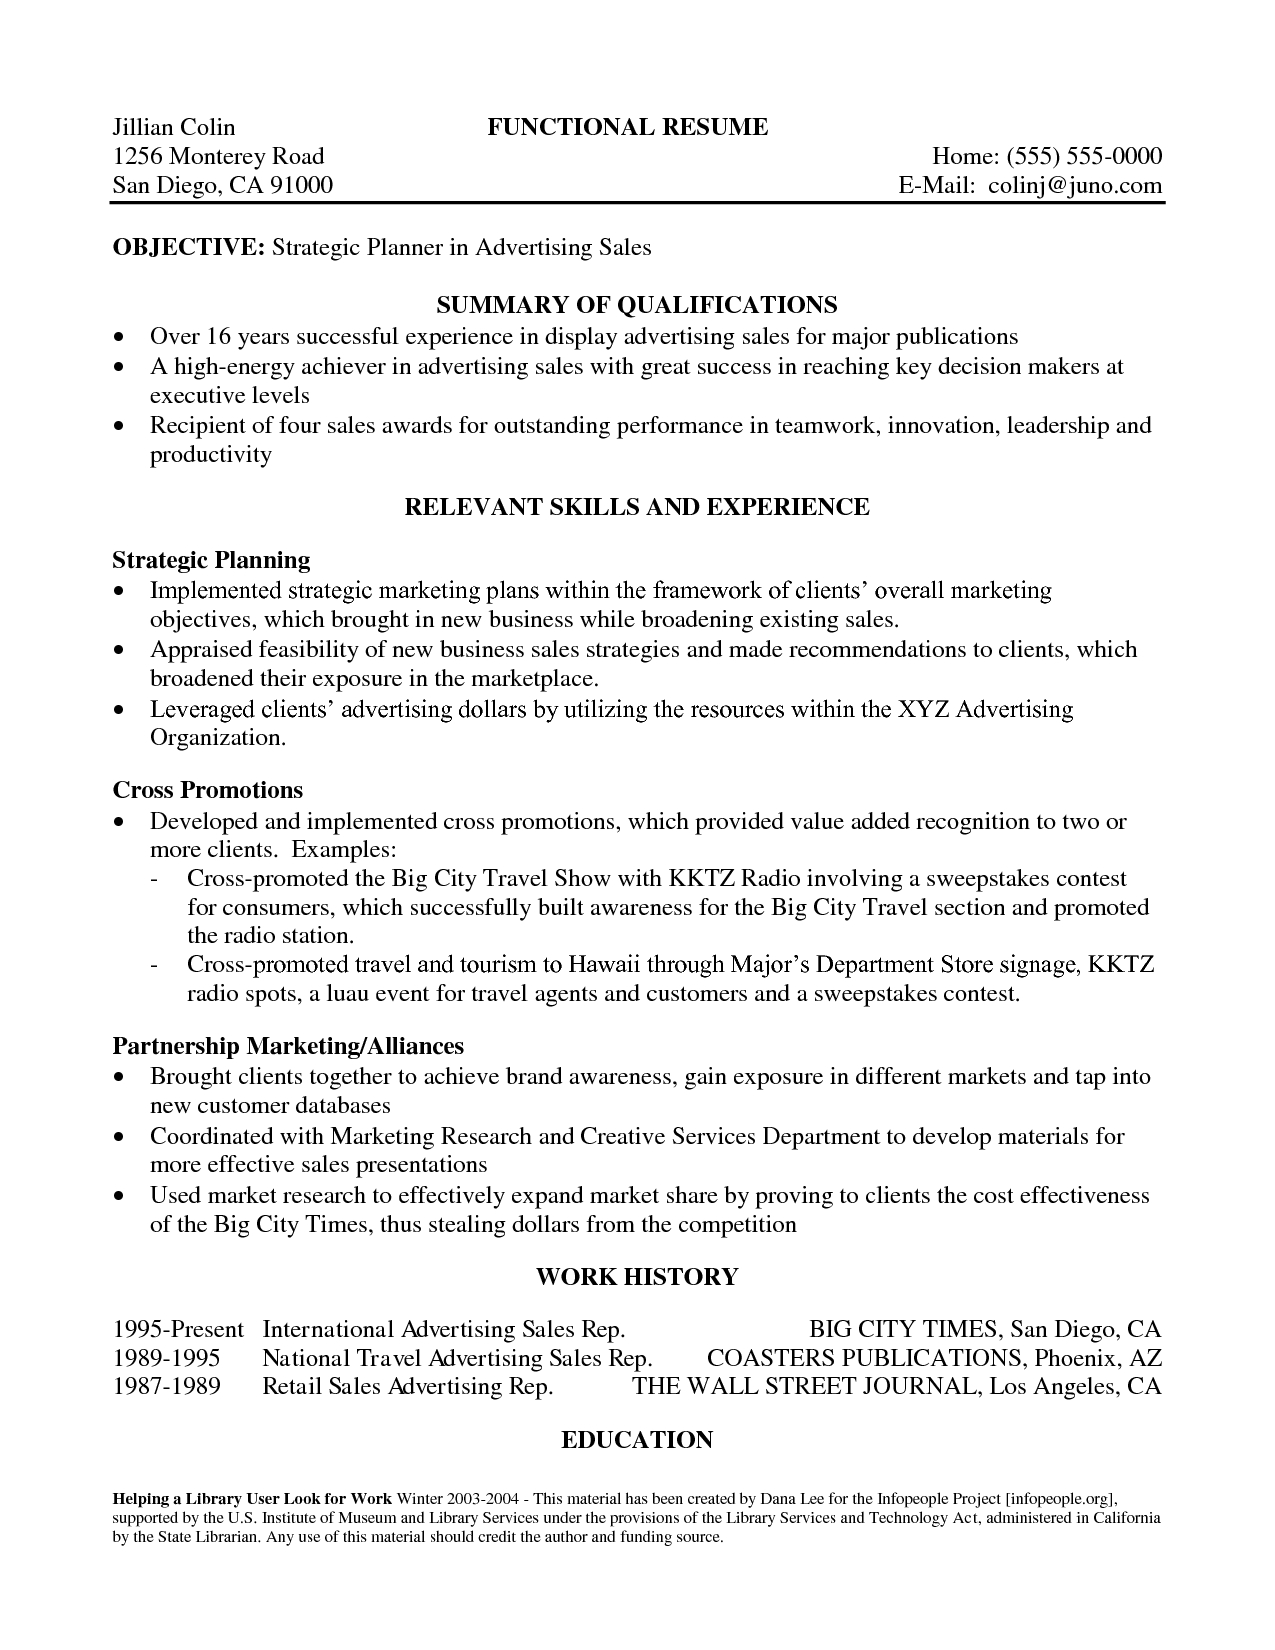 Summary of qualifications sample for resume October 17